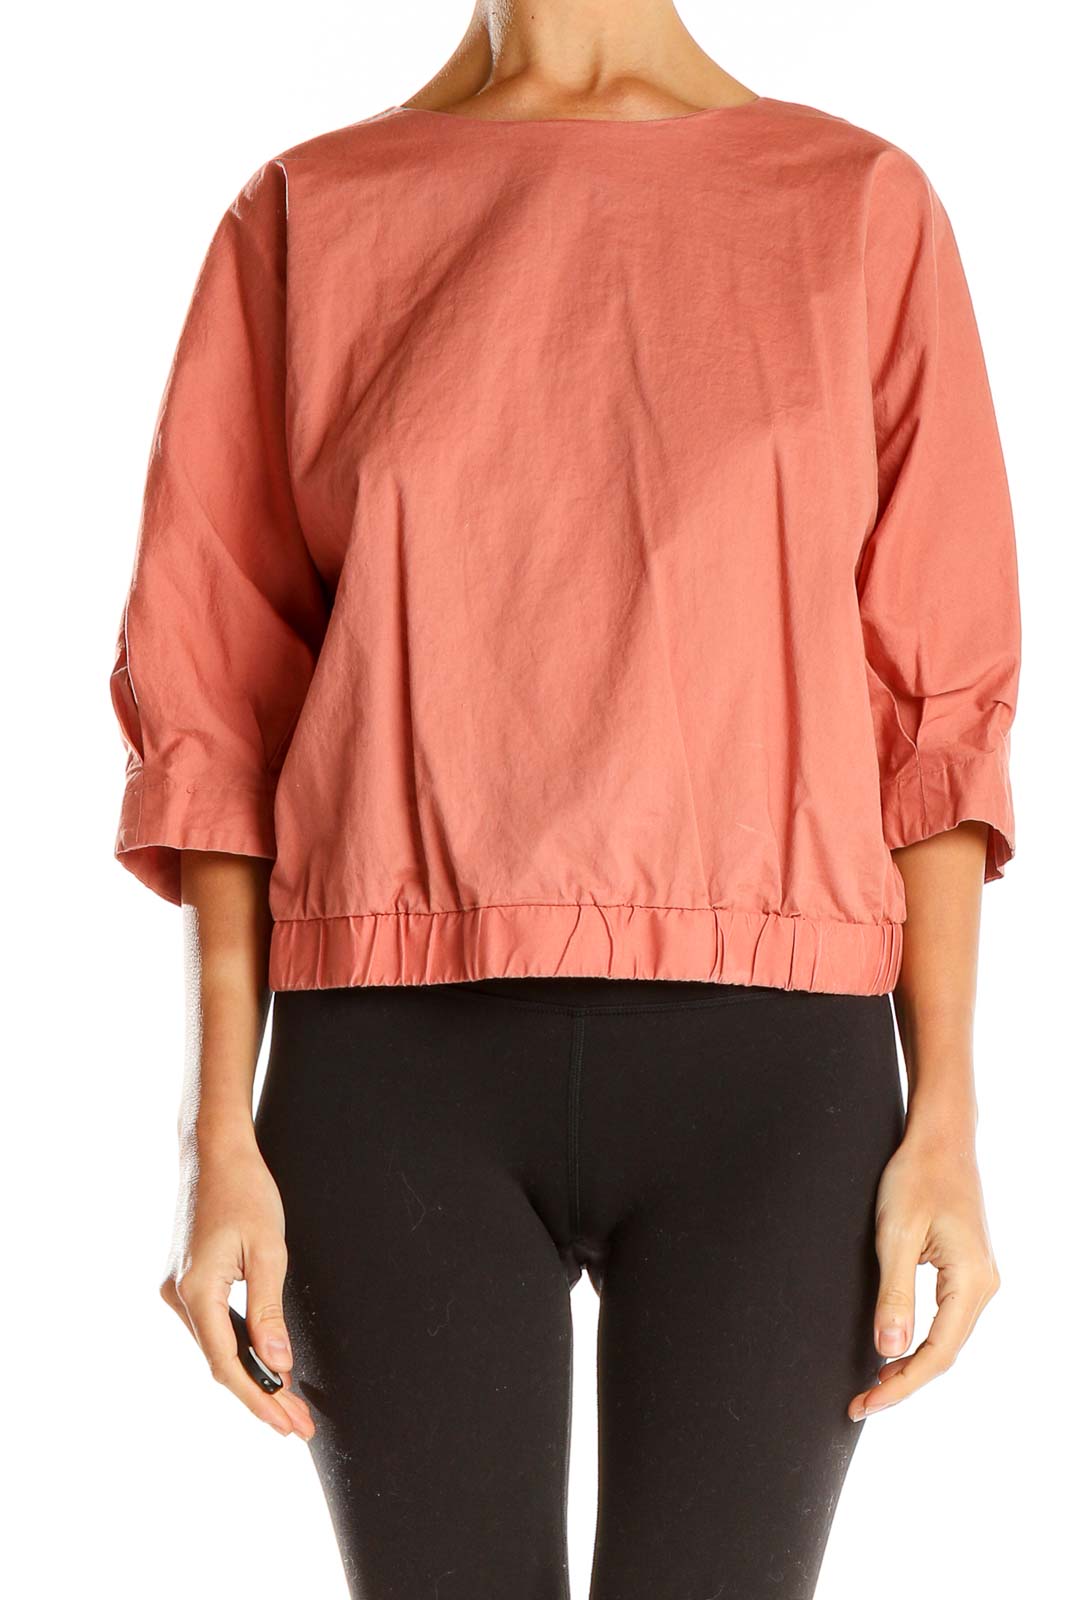 Pink Structured High Neck All Day Wear Blouse Front